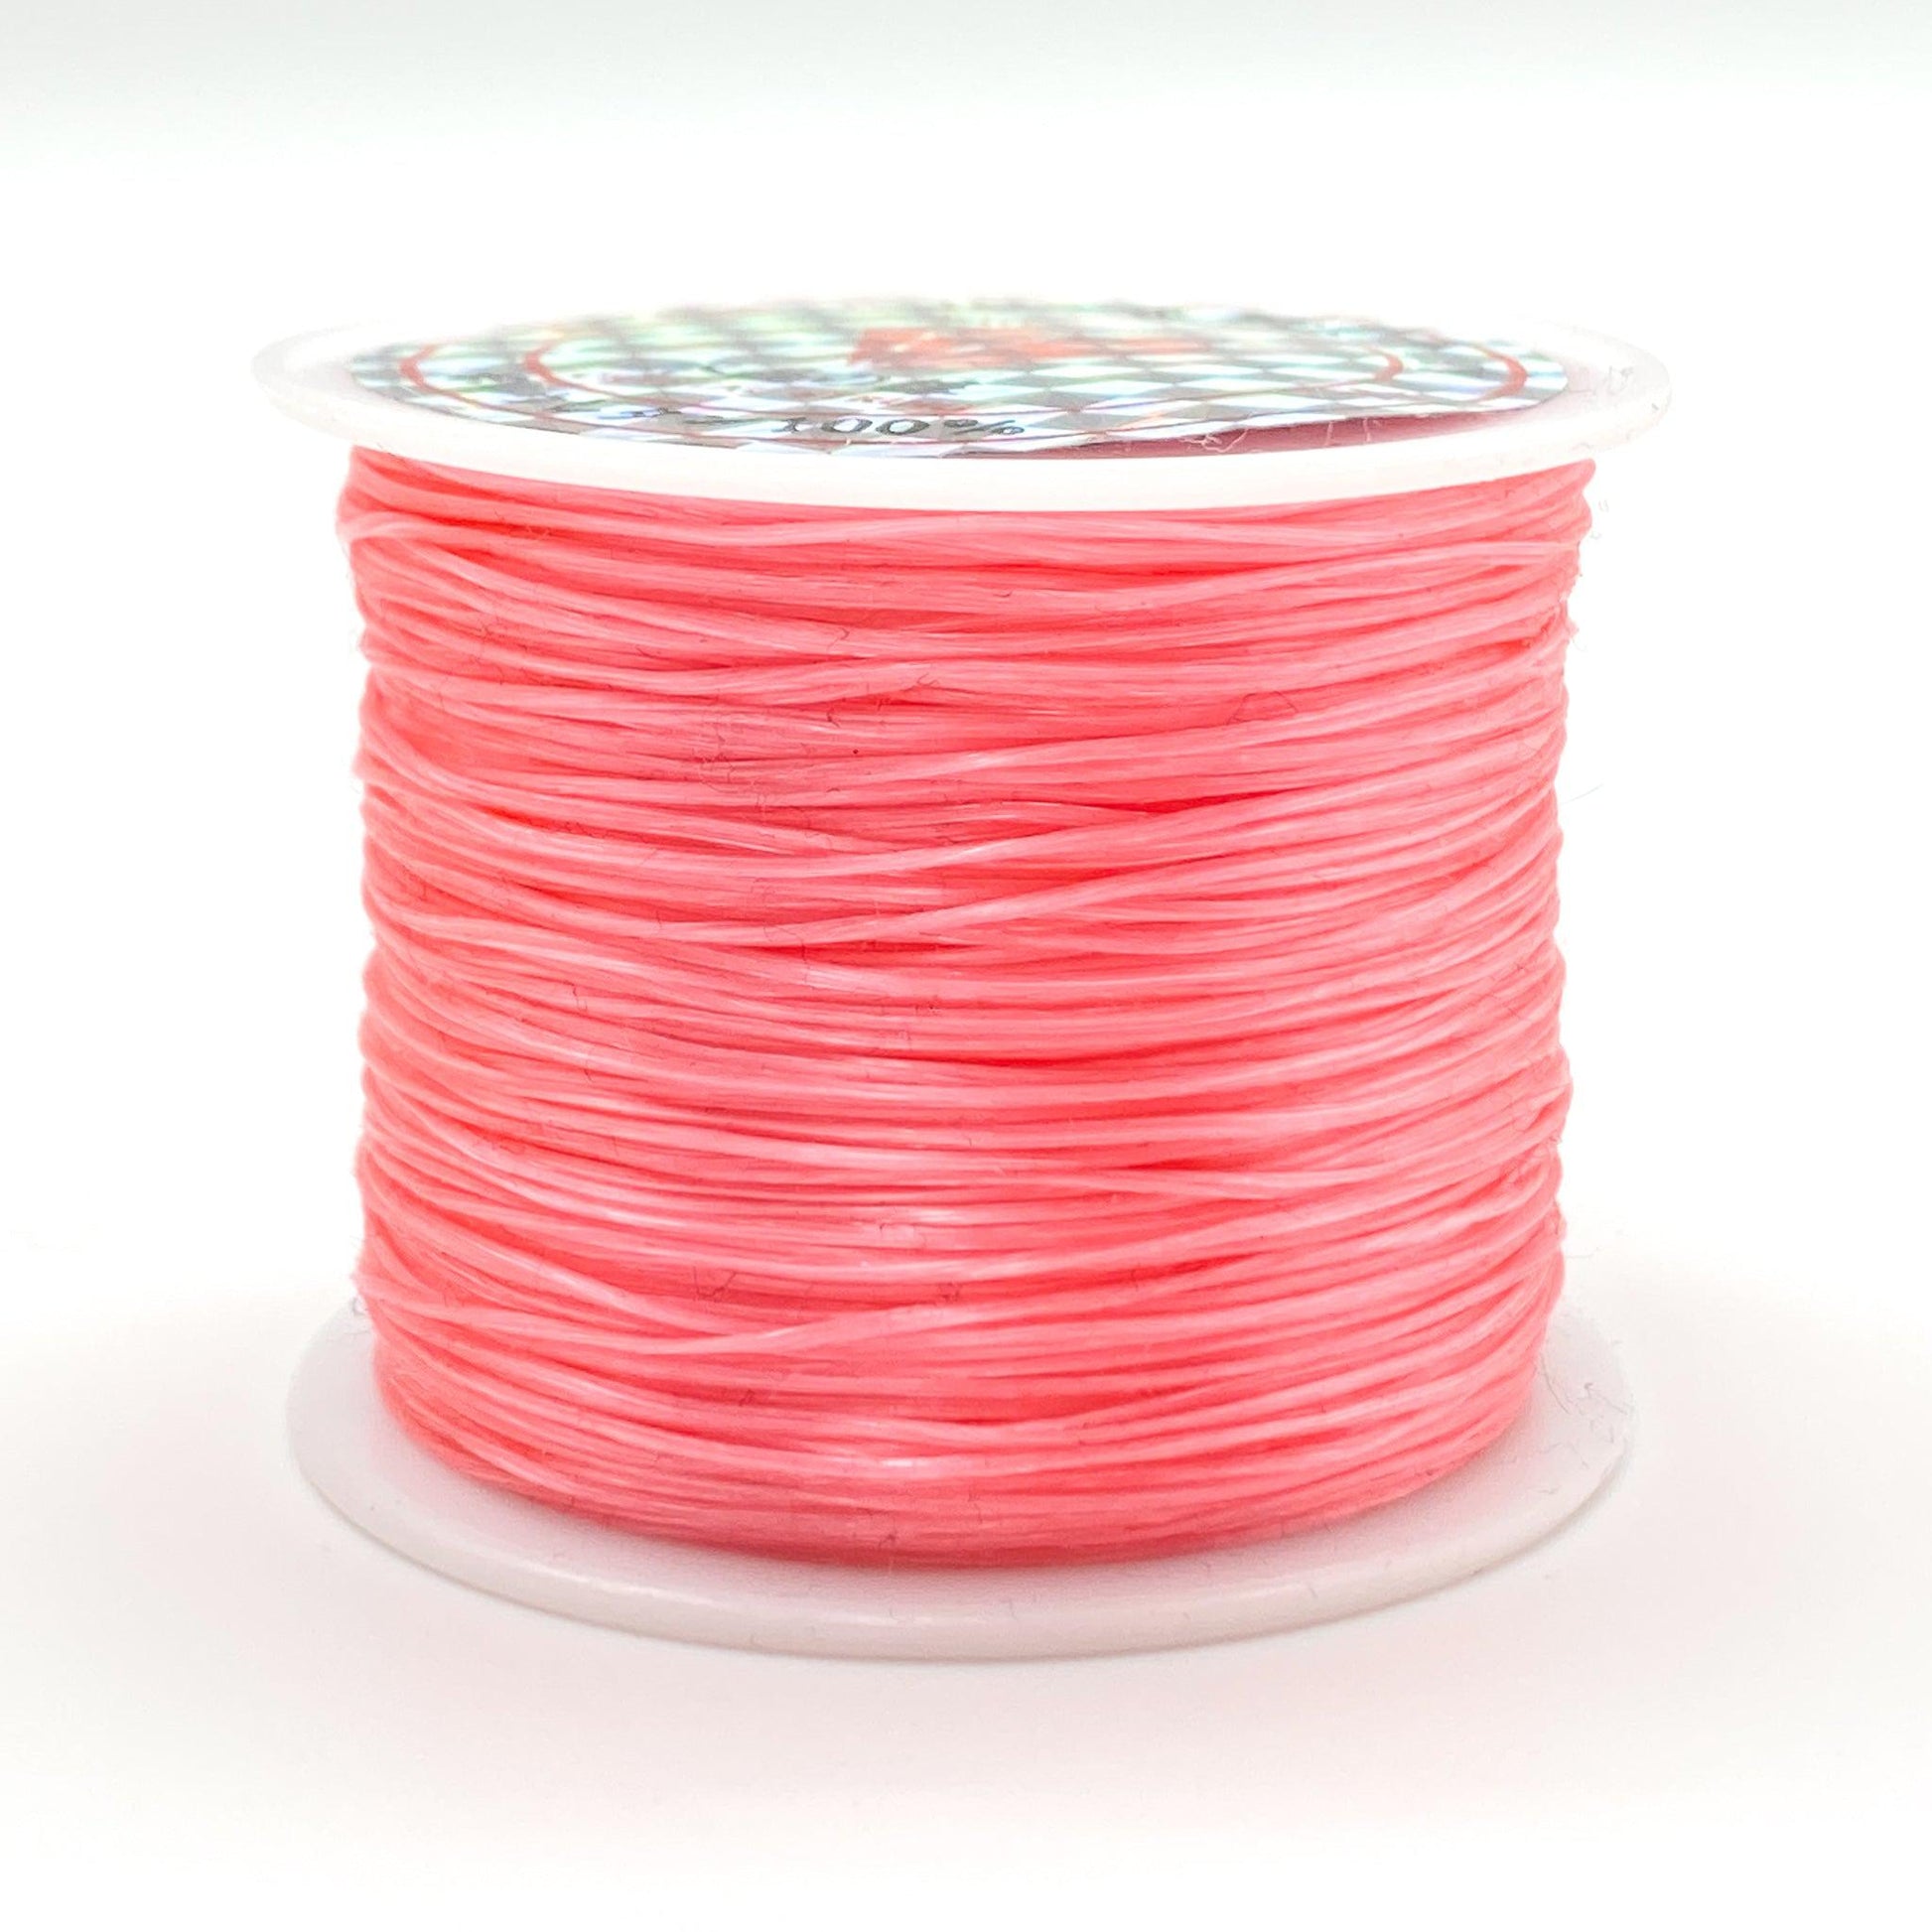 Stretchy Cord Spool - A BESTSELLER